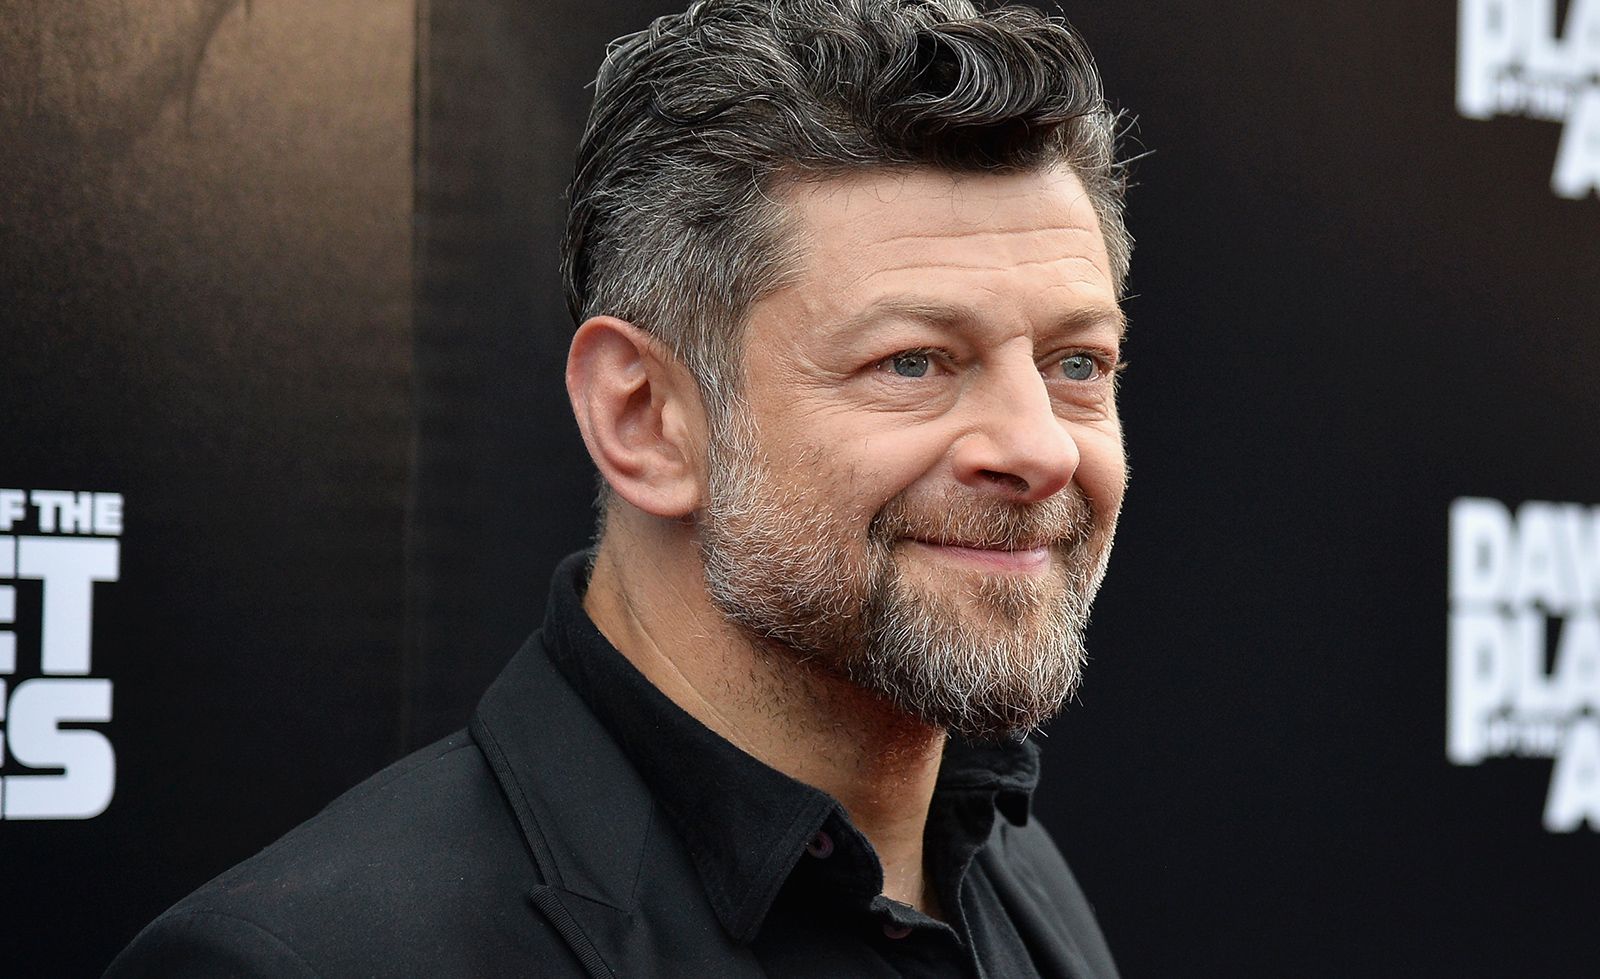 My Character Is Inspired By Mahatma Gandhi: Andy Serkis On War Of The Planet Of The Apes